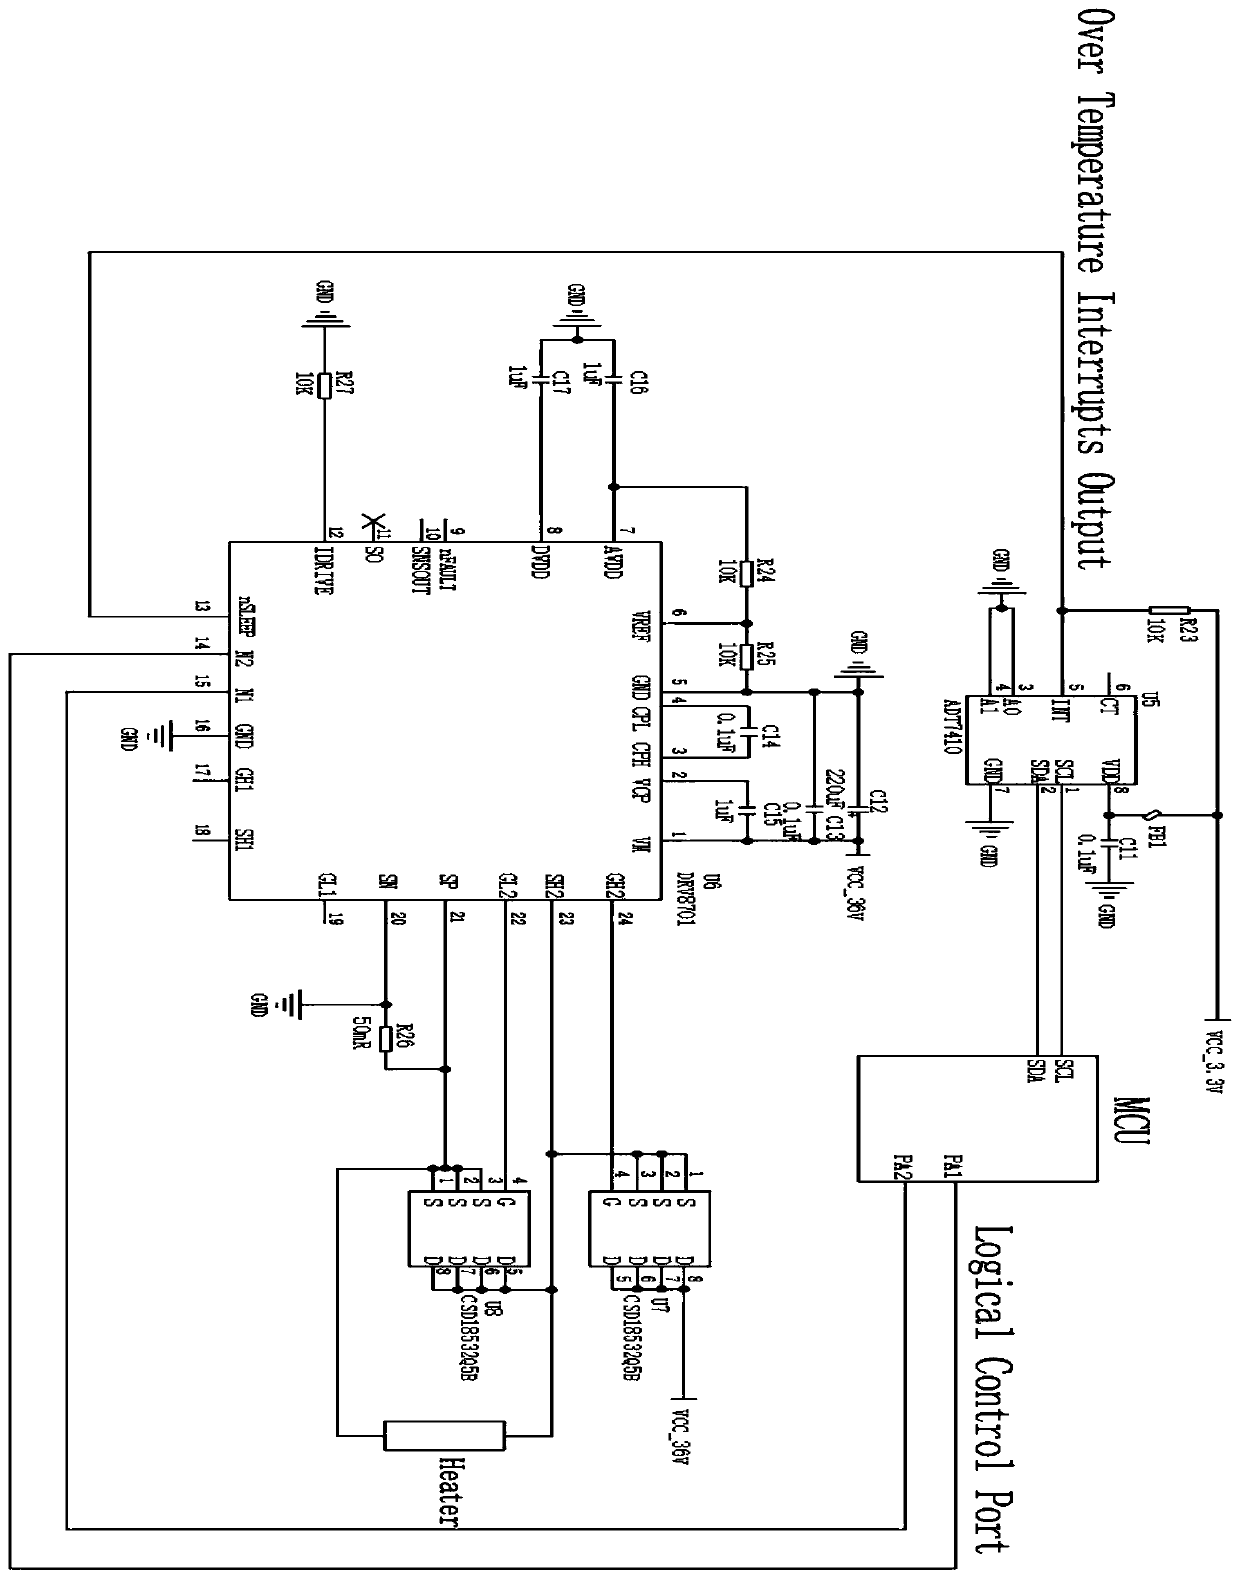 Over-temperature protection device of program-controlled temperature control system